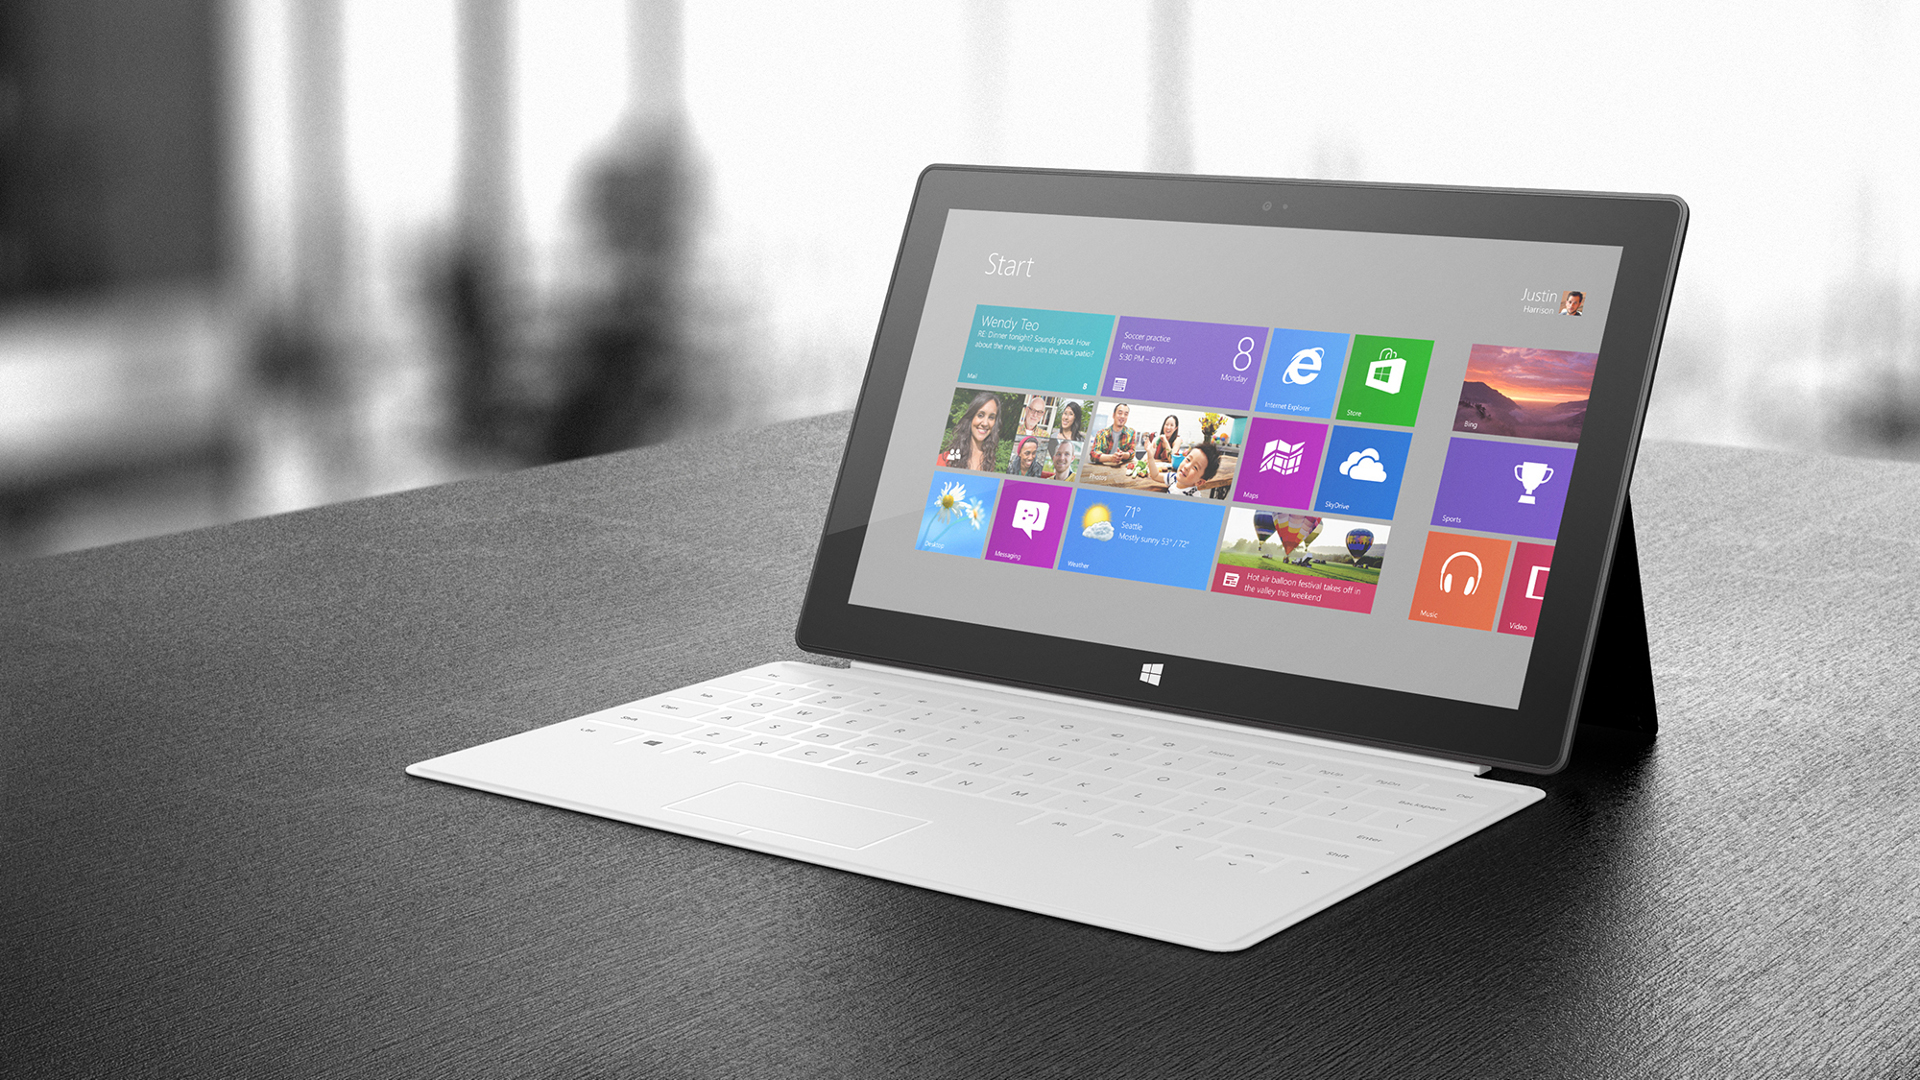 Download an HD Wallpaper with Microsofts Surface Tablet